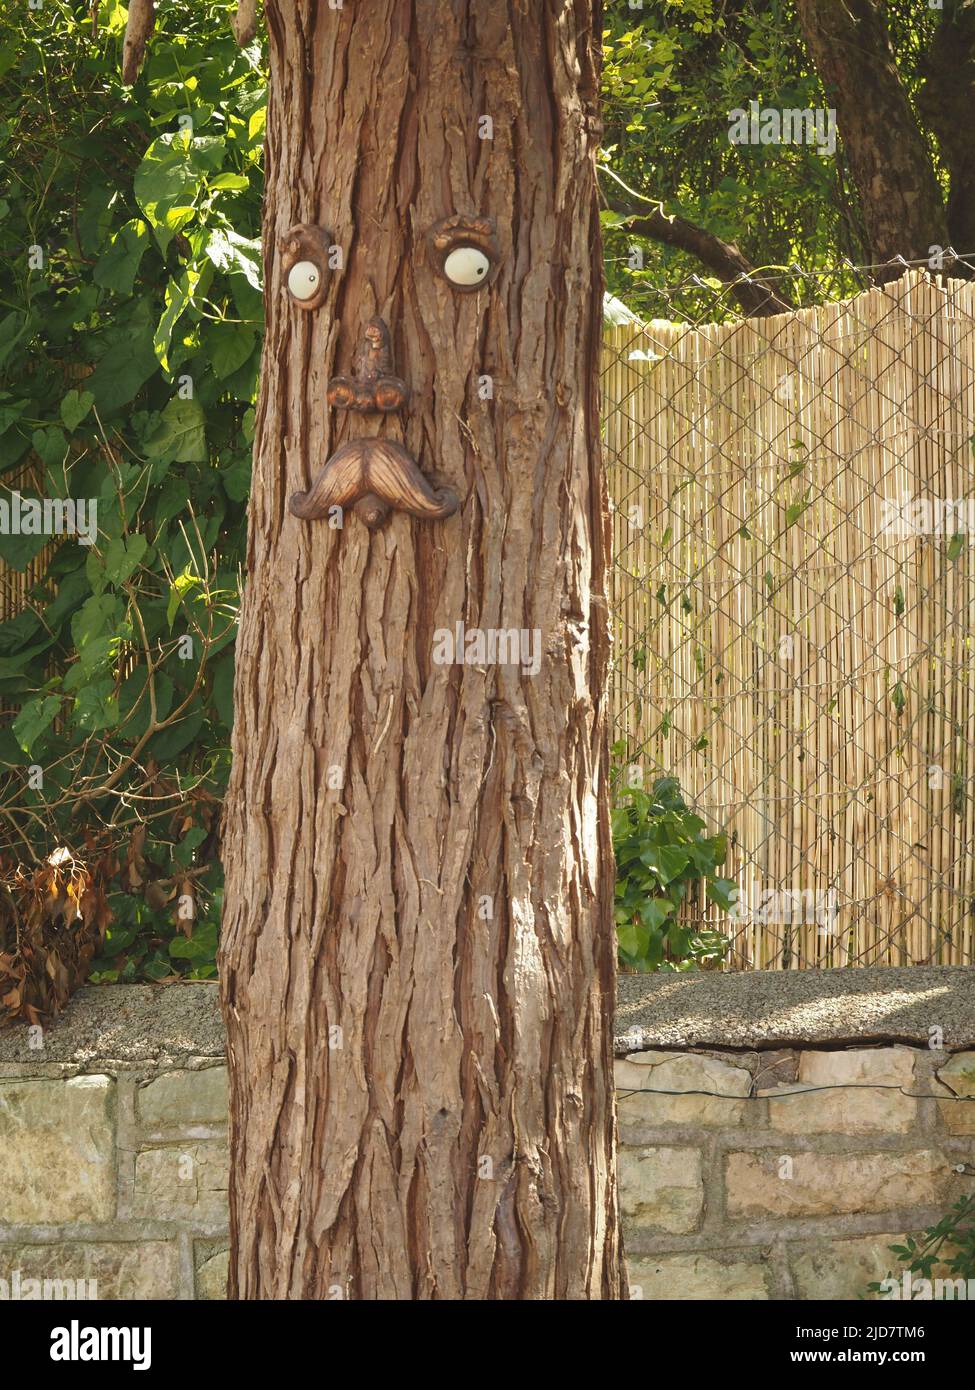 Face sculpture with moustache on tree trunk at Radstock, Somerset. Stock Photo